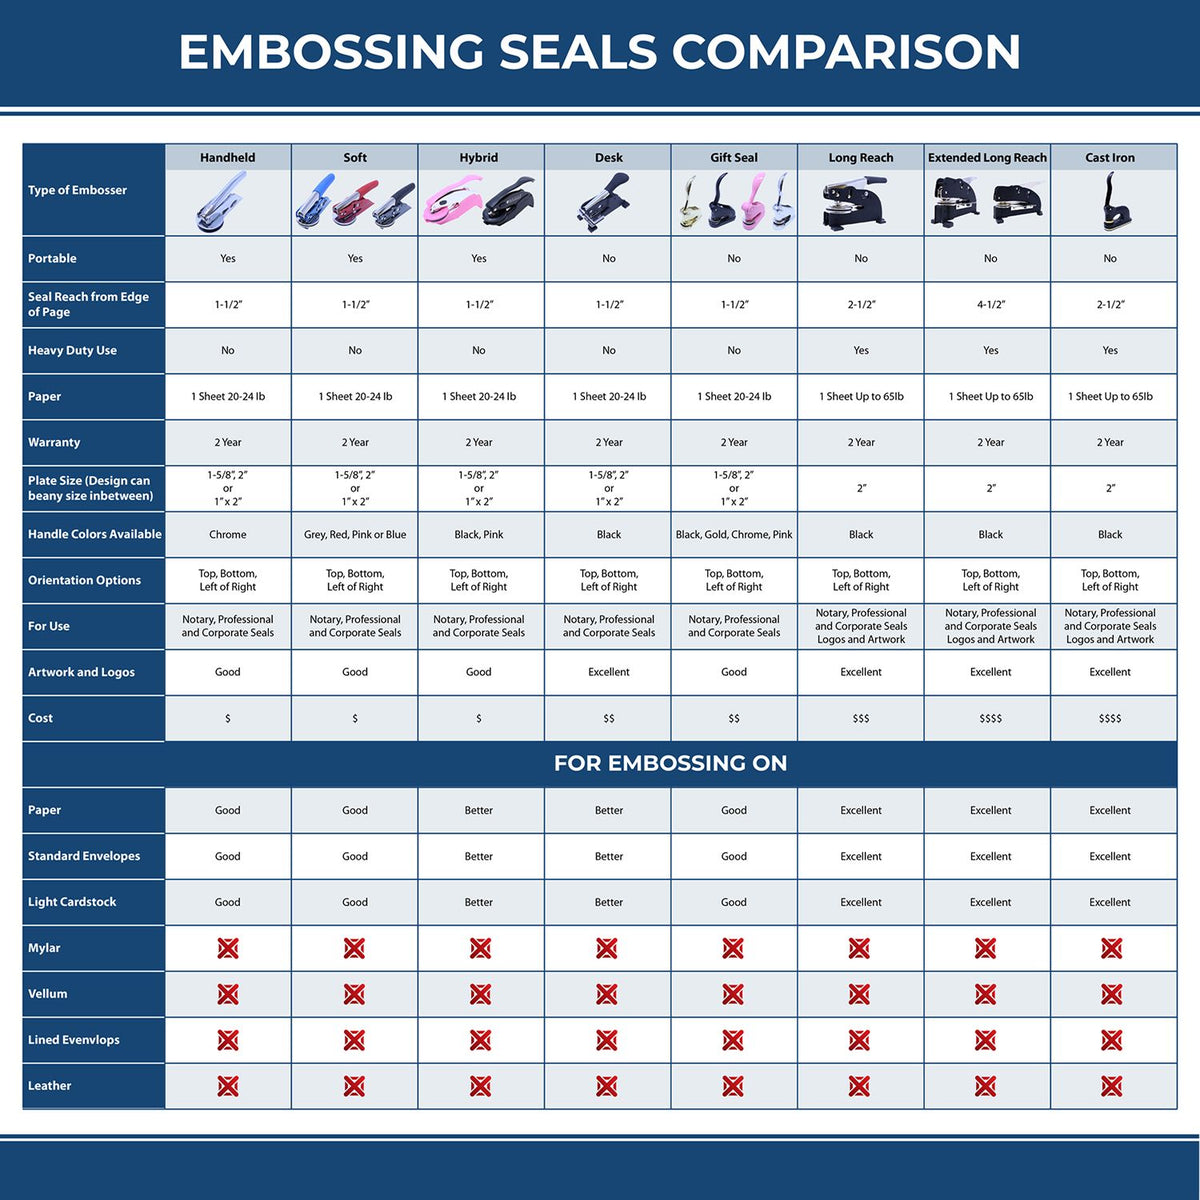 A comparison chart for the different types of mount models available for the Hybrid Ohio Engineer Seal